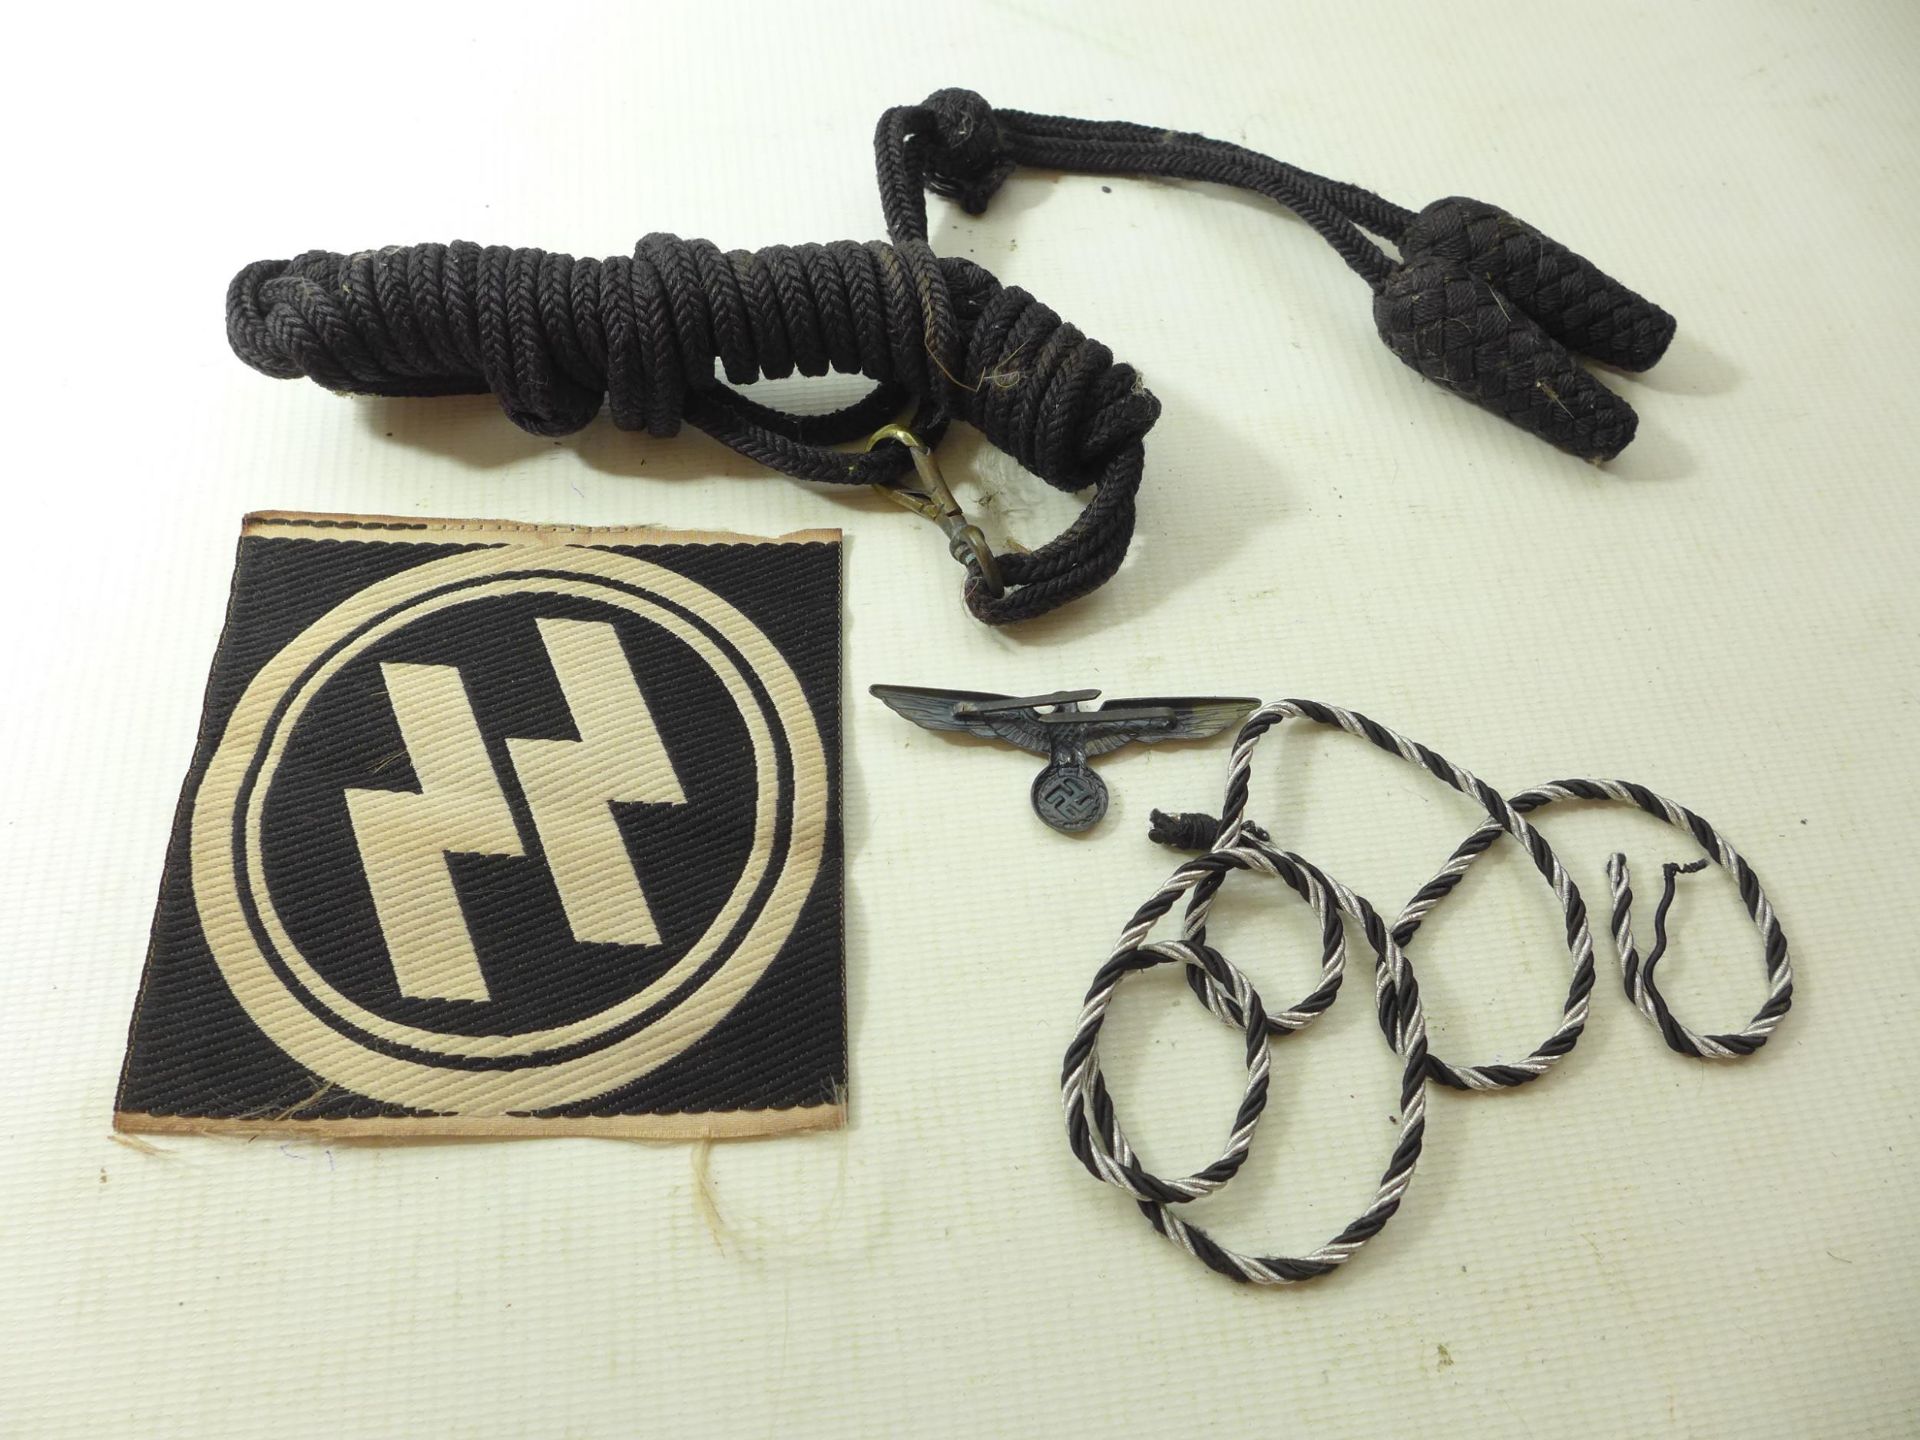 A NAZI GERMANY SS CLOTH BADGE, TWO LOTS OF BRAID AND AN EAGLE & SWASTIKA BADGE - Image 2 of 2